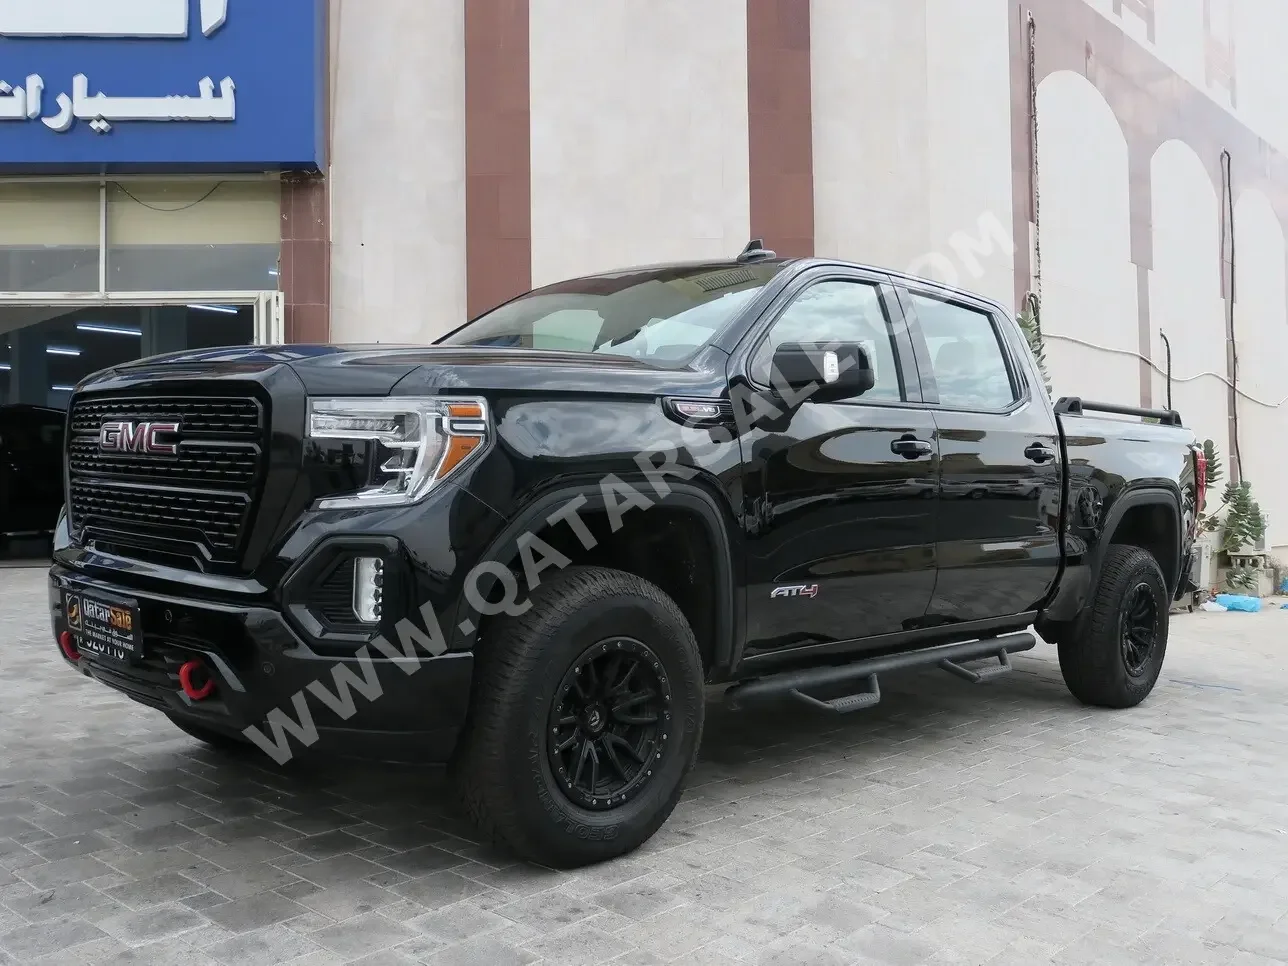 GMC  Sierra  AT4  2019  Automatic  133,000 Km  8 Cylinder  Four Wheel Drive (4WD)  Pick Up  Black